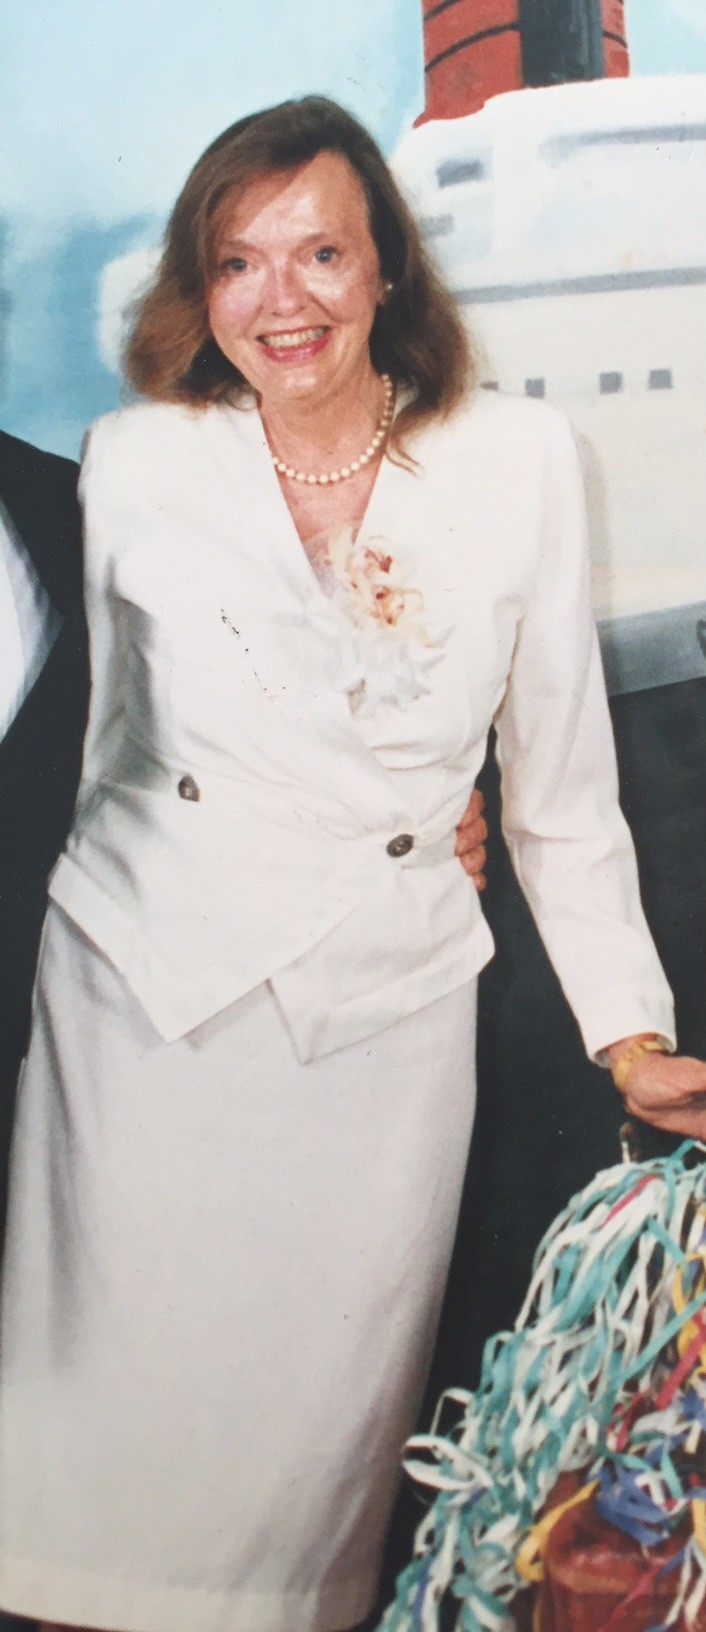 Margaret Giovanniello was a successful lawyer and a New York State  administrative law judge.